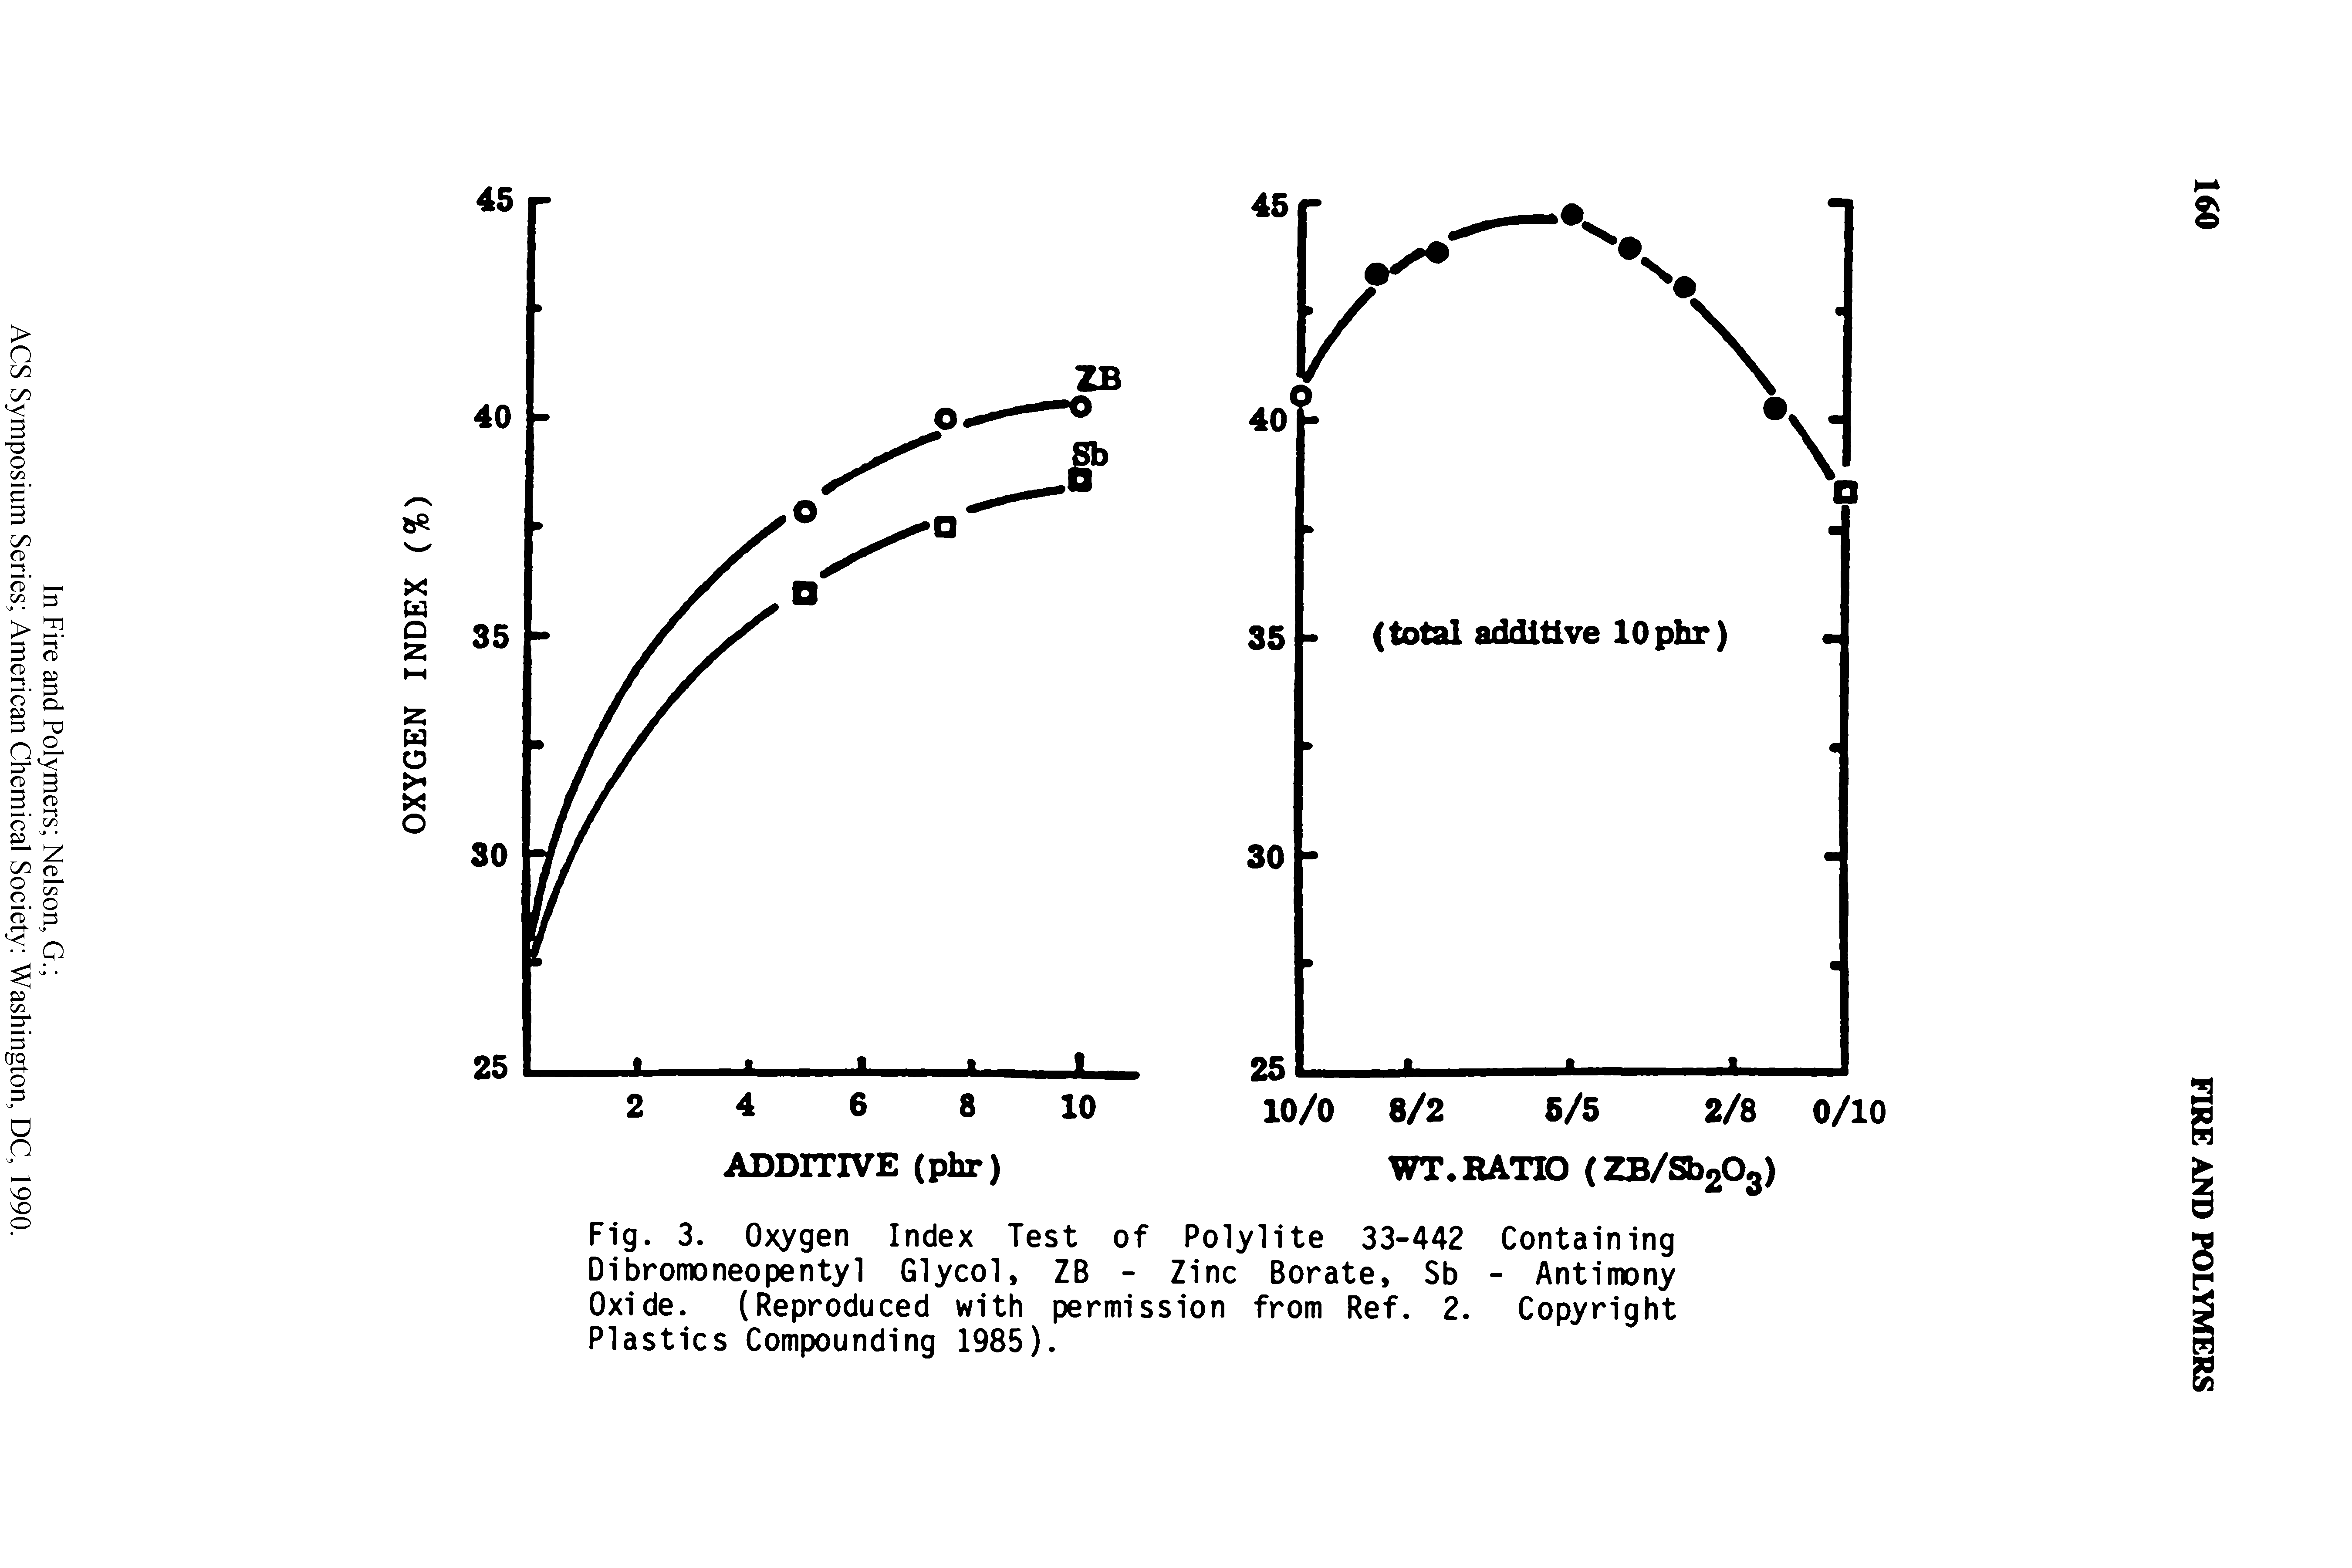 Fig. 3. Oxygen Index Test of Polylite 33-442 Containing Dibromoneopentyl Glycol, ZB - Zinc Borate, Sb - Antimony Oxide. (Reproduced with permission from Ref. 2. Copyright Plastics Compounding 1985).